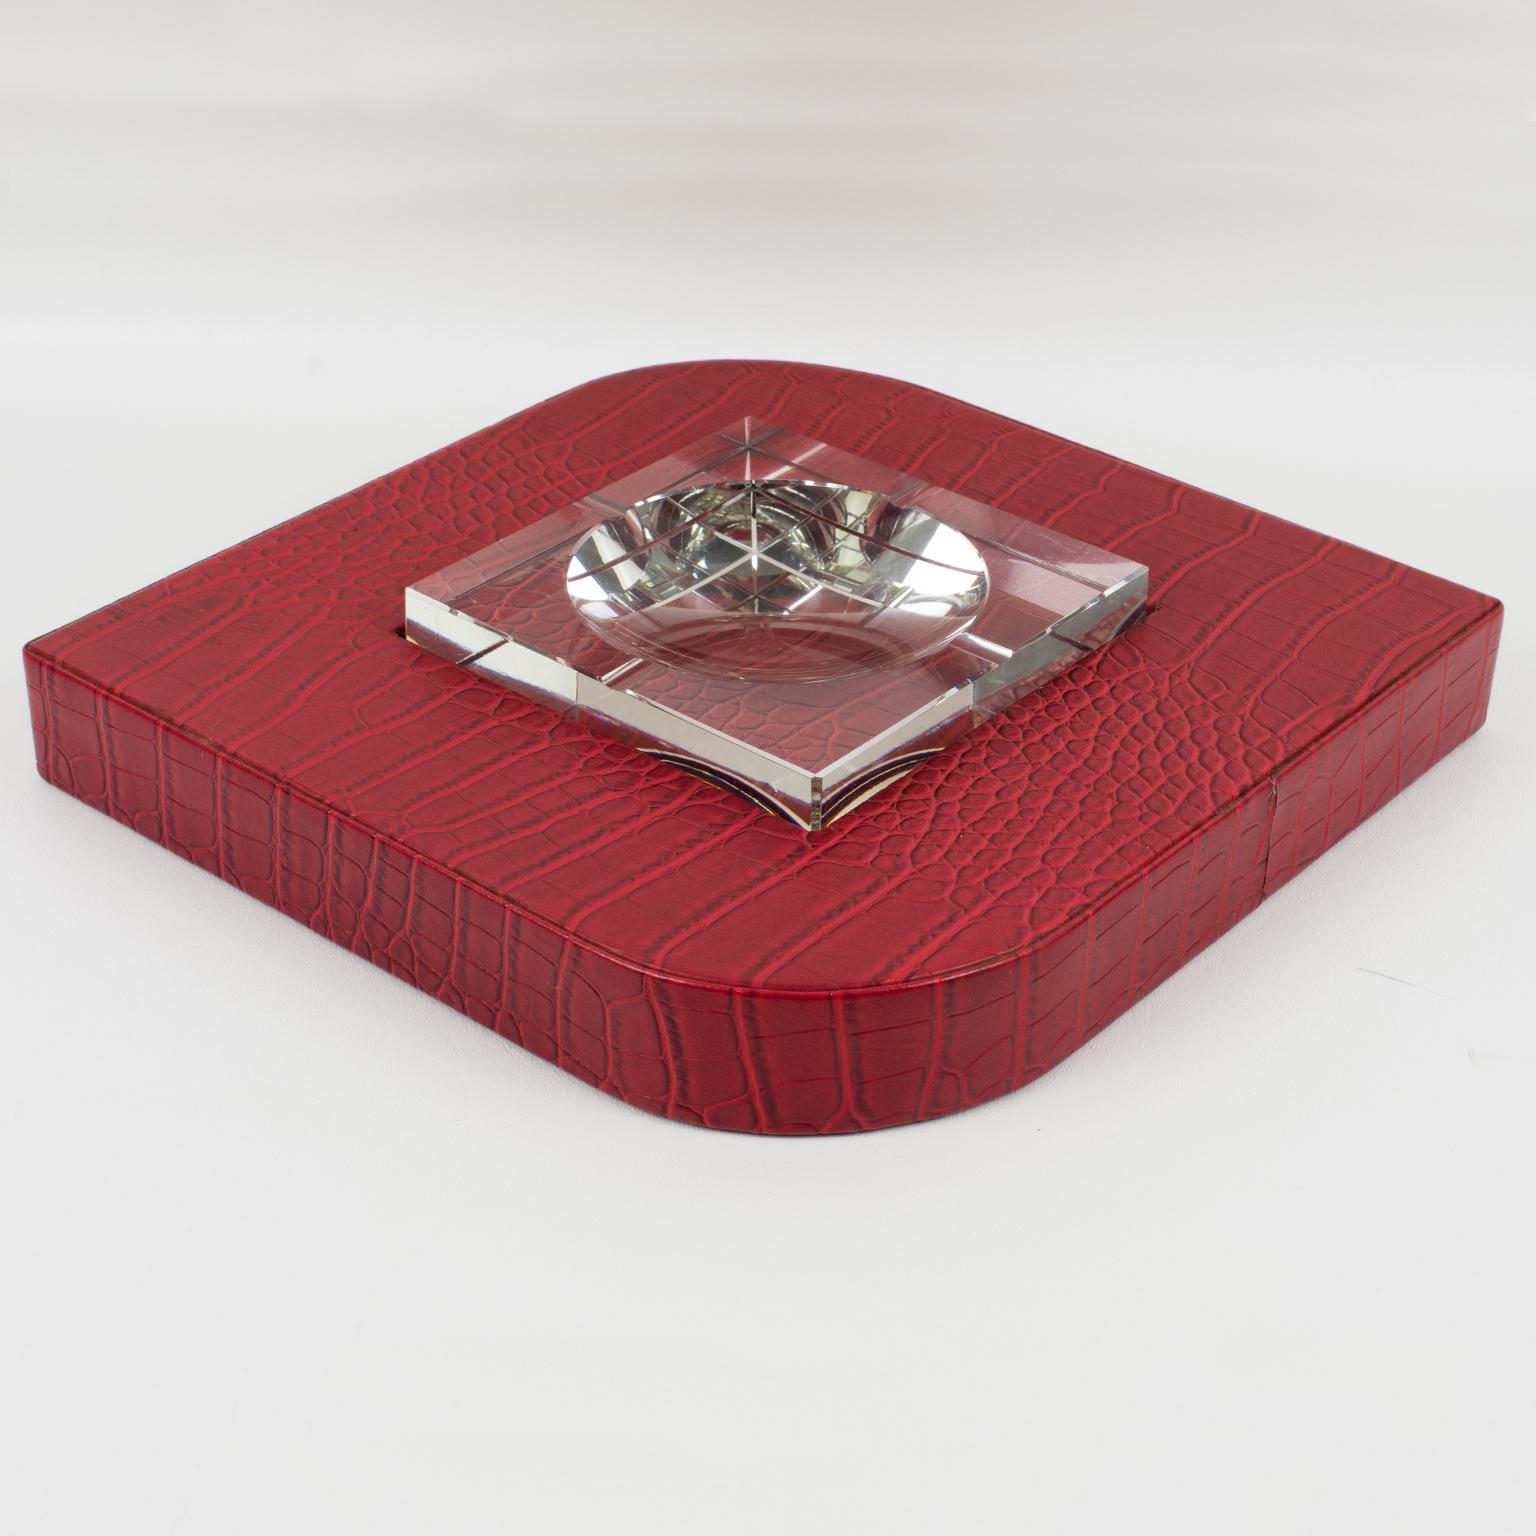 Dupre Lafon Style Red Leather and Crystal Cigar Ashtray Catchall Vide Poche 6